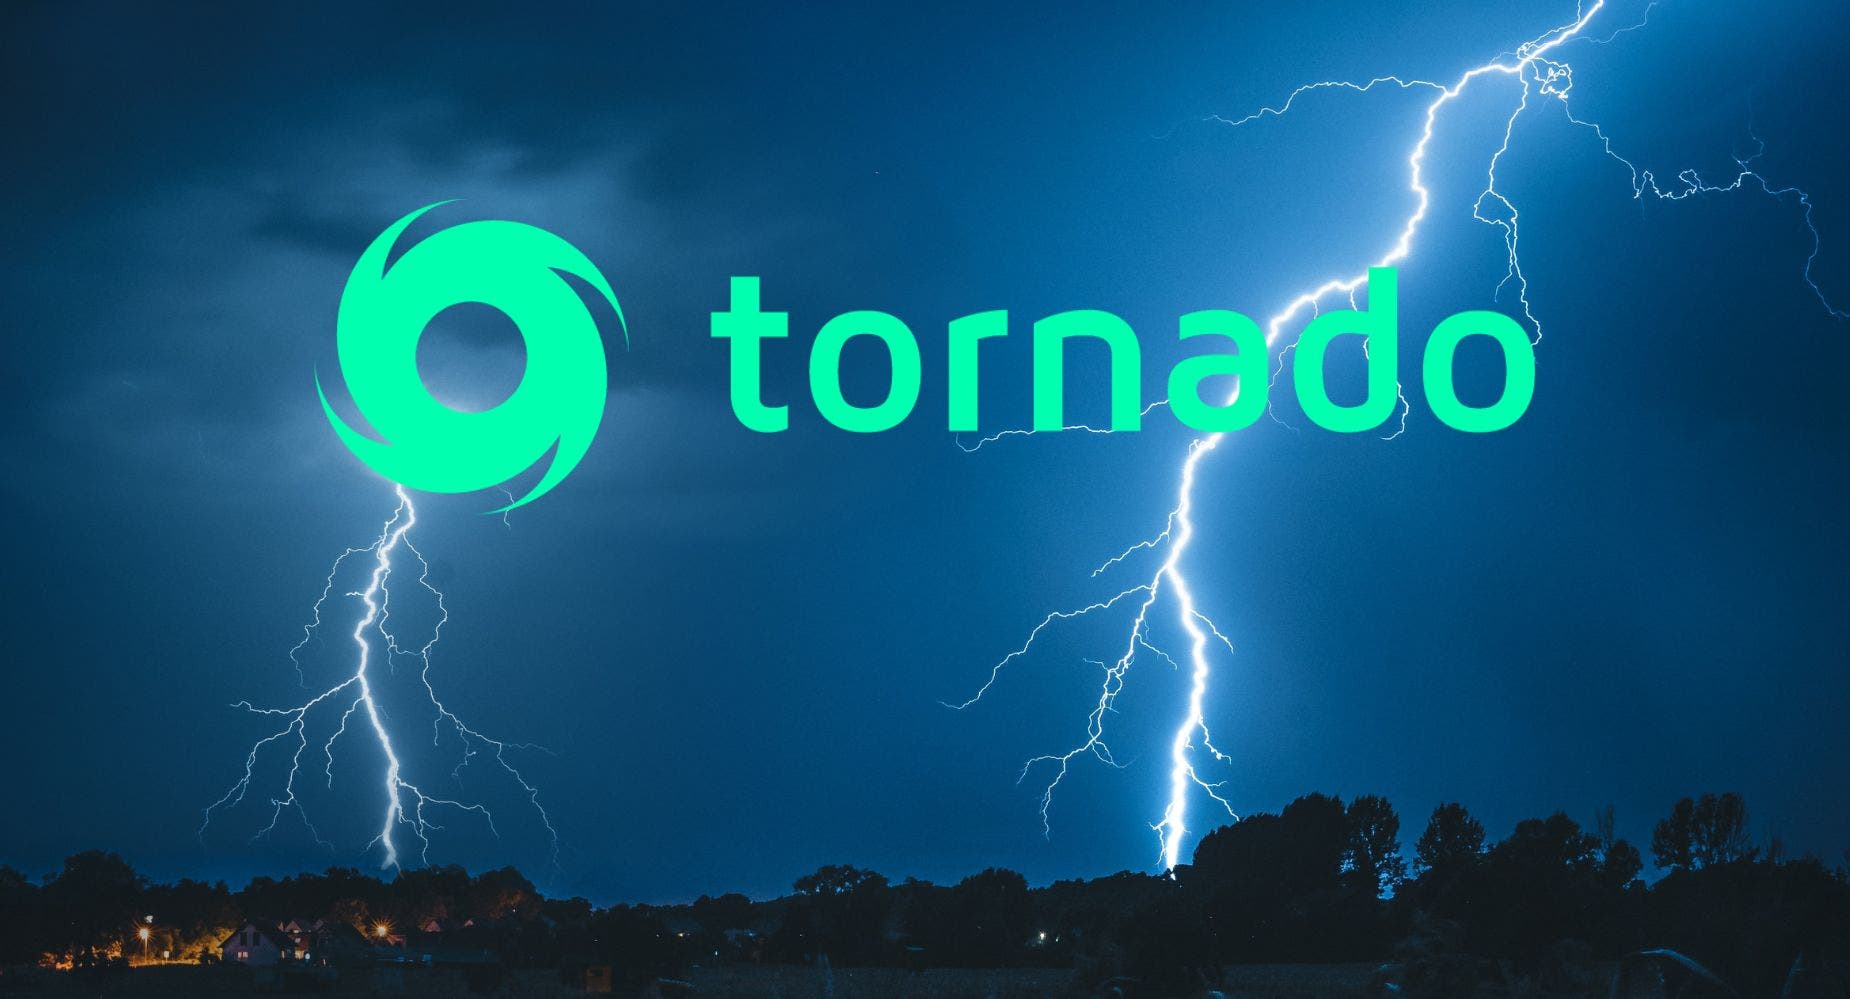 Kevin O'Leary On Tornado Cash Creator: 'It's Okay To Arrest That Guy'